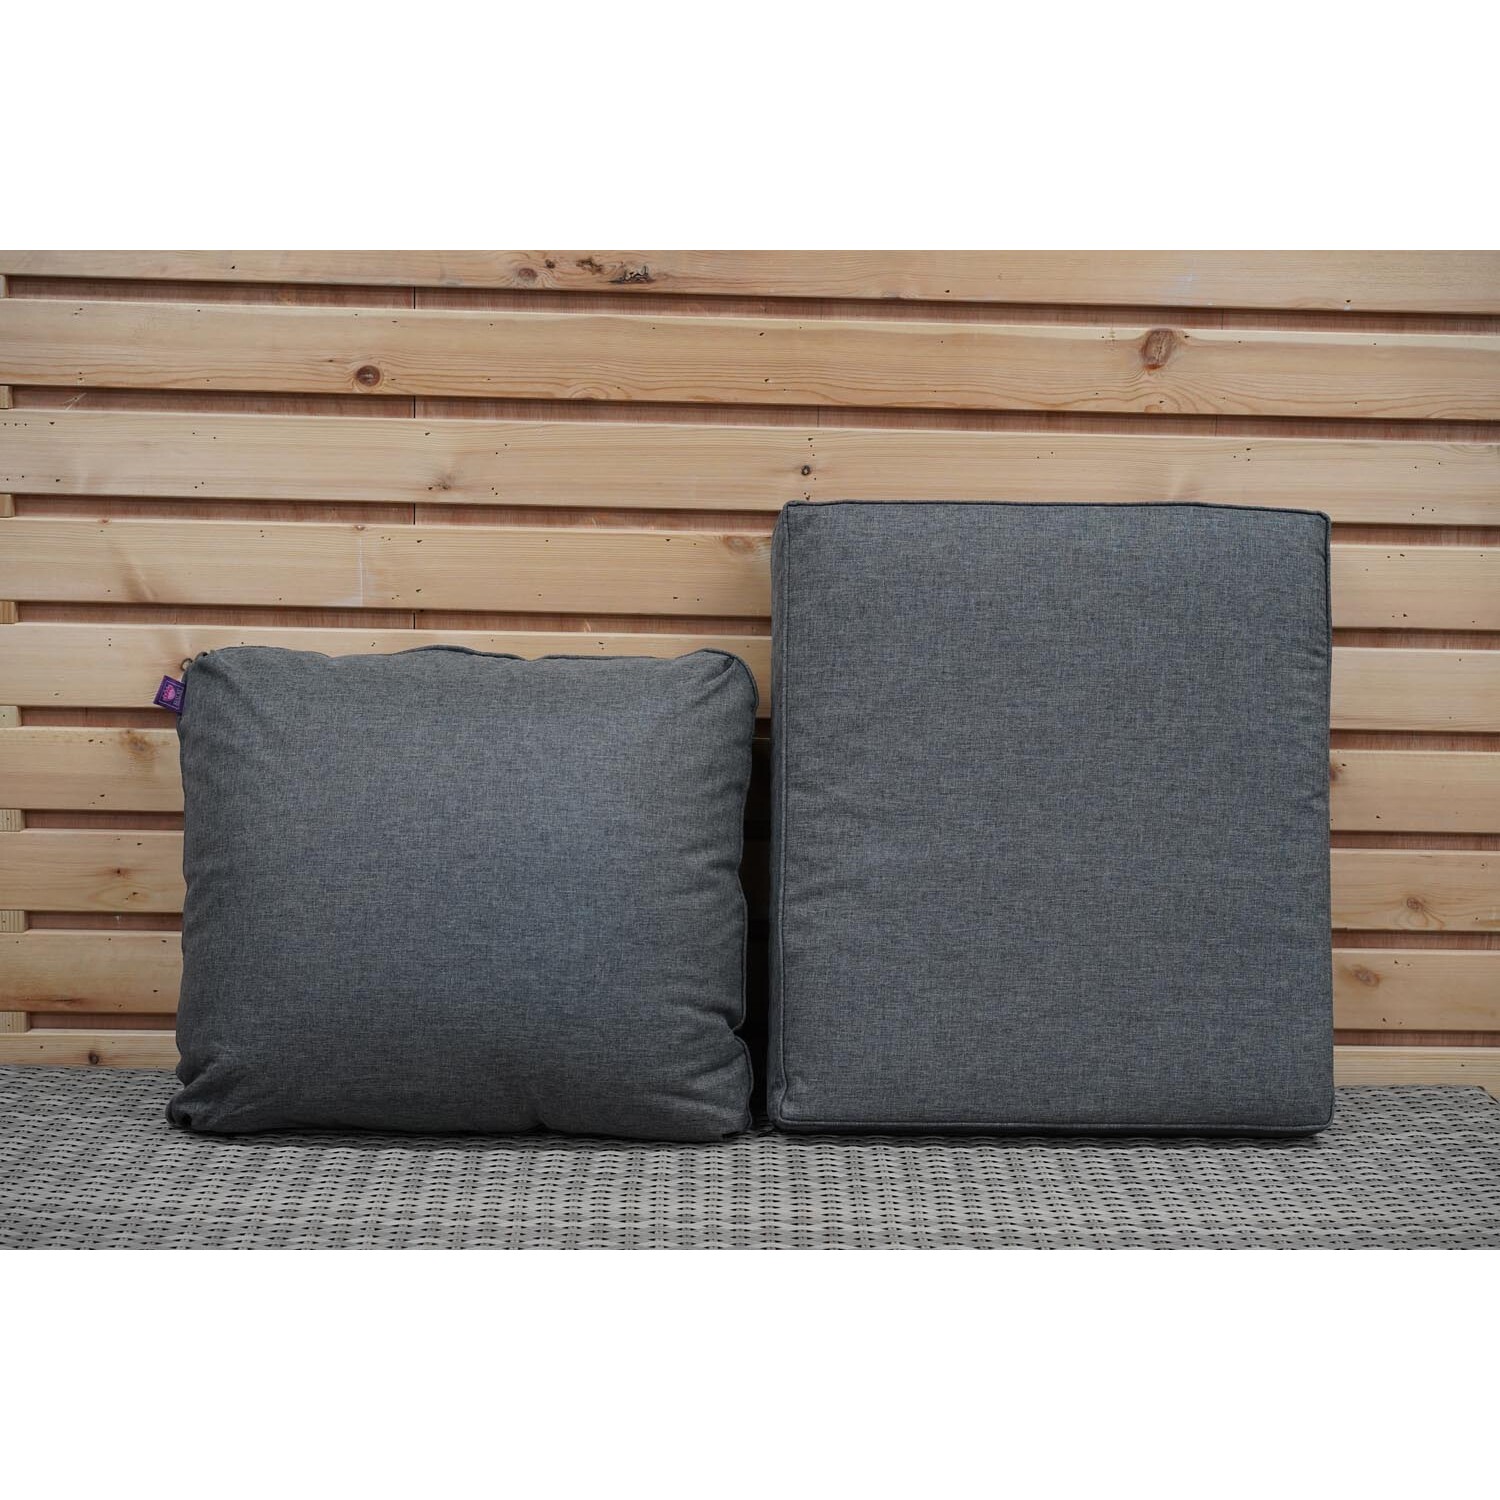 Malay Deluxe New Hampshire Cushions - Grey Image 2